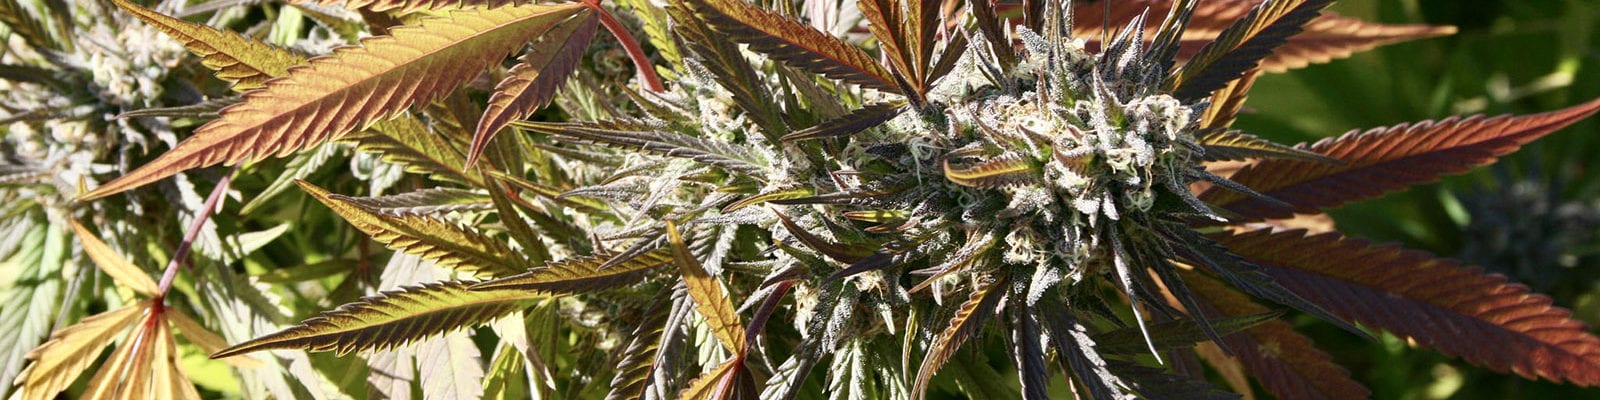 An outdoor cannabis plant's cola inside of a garden grow site in Humboldt County.